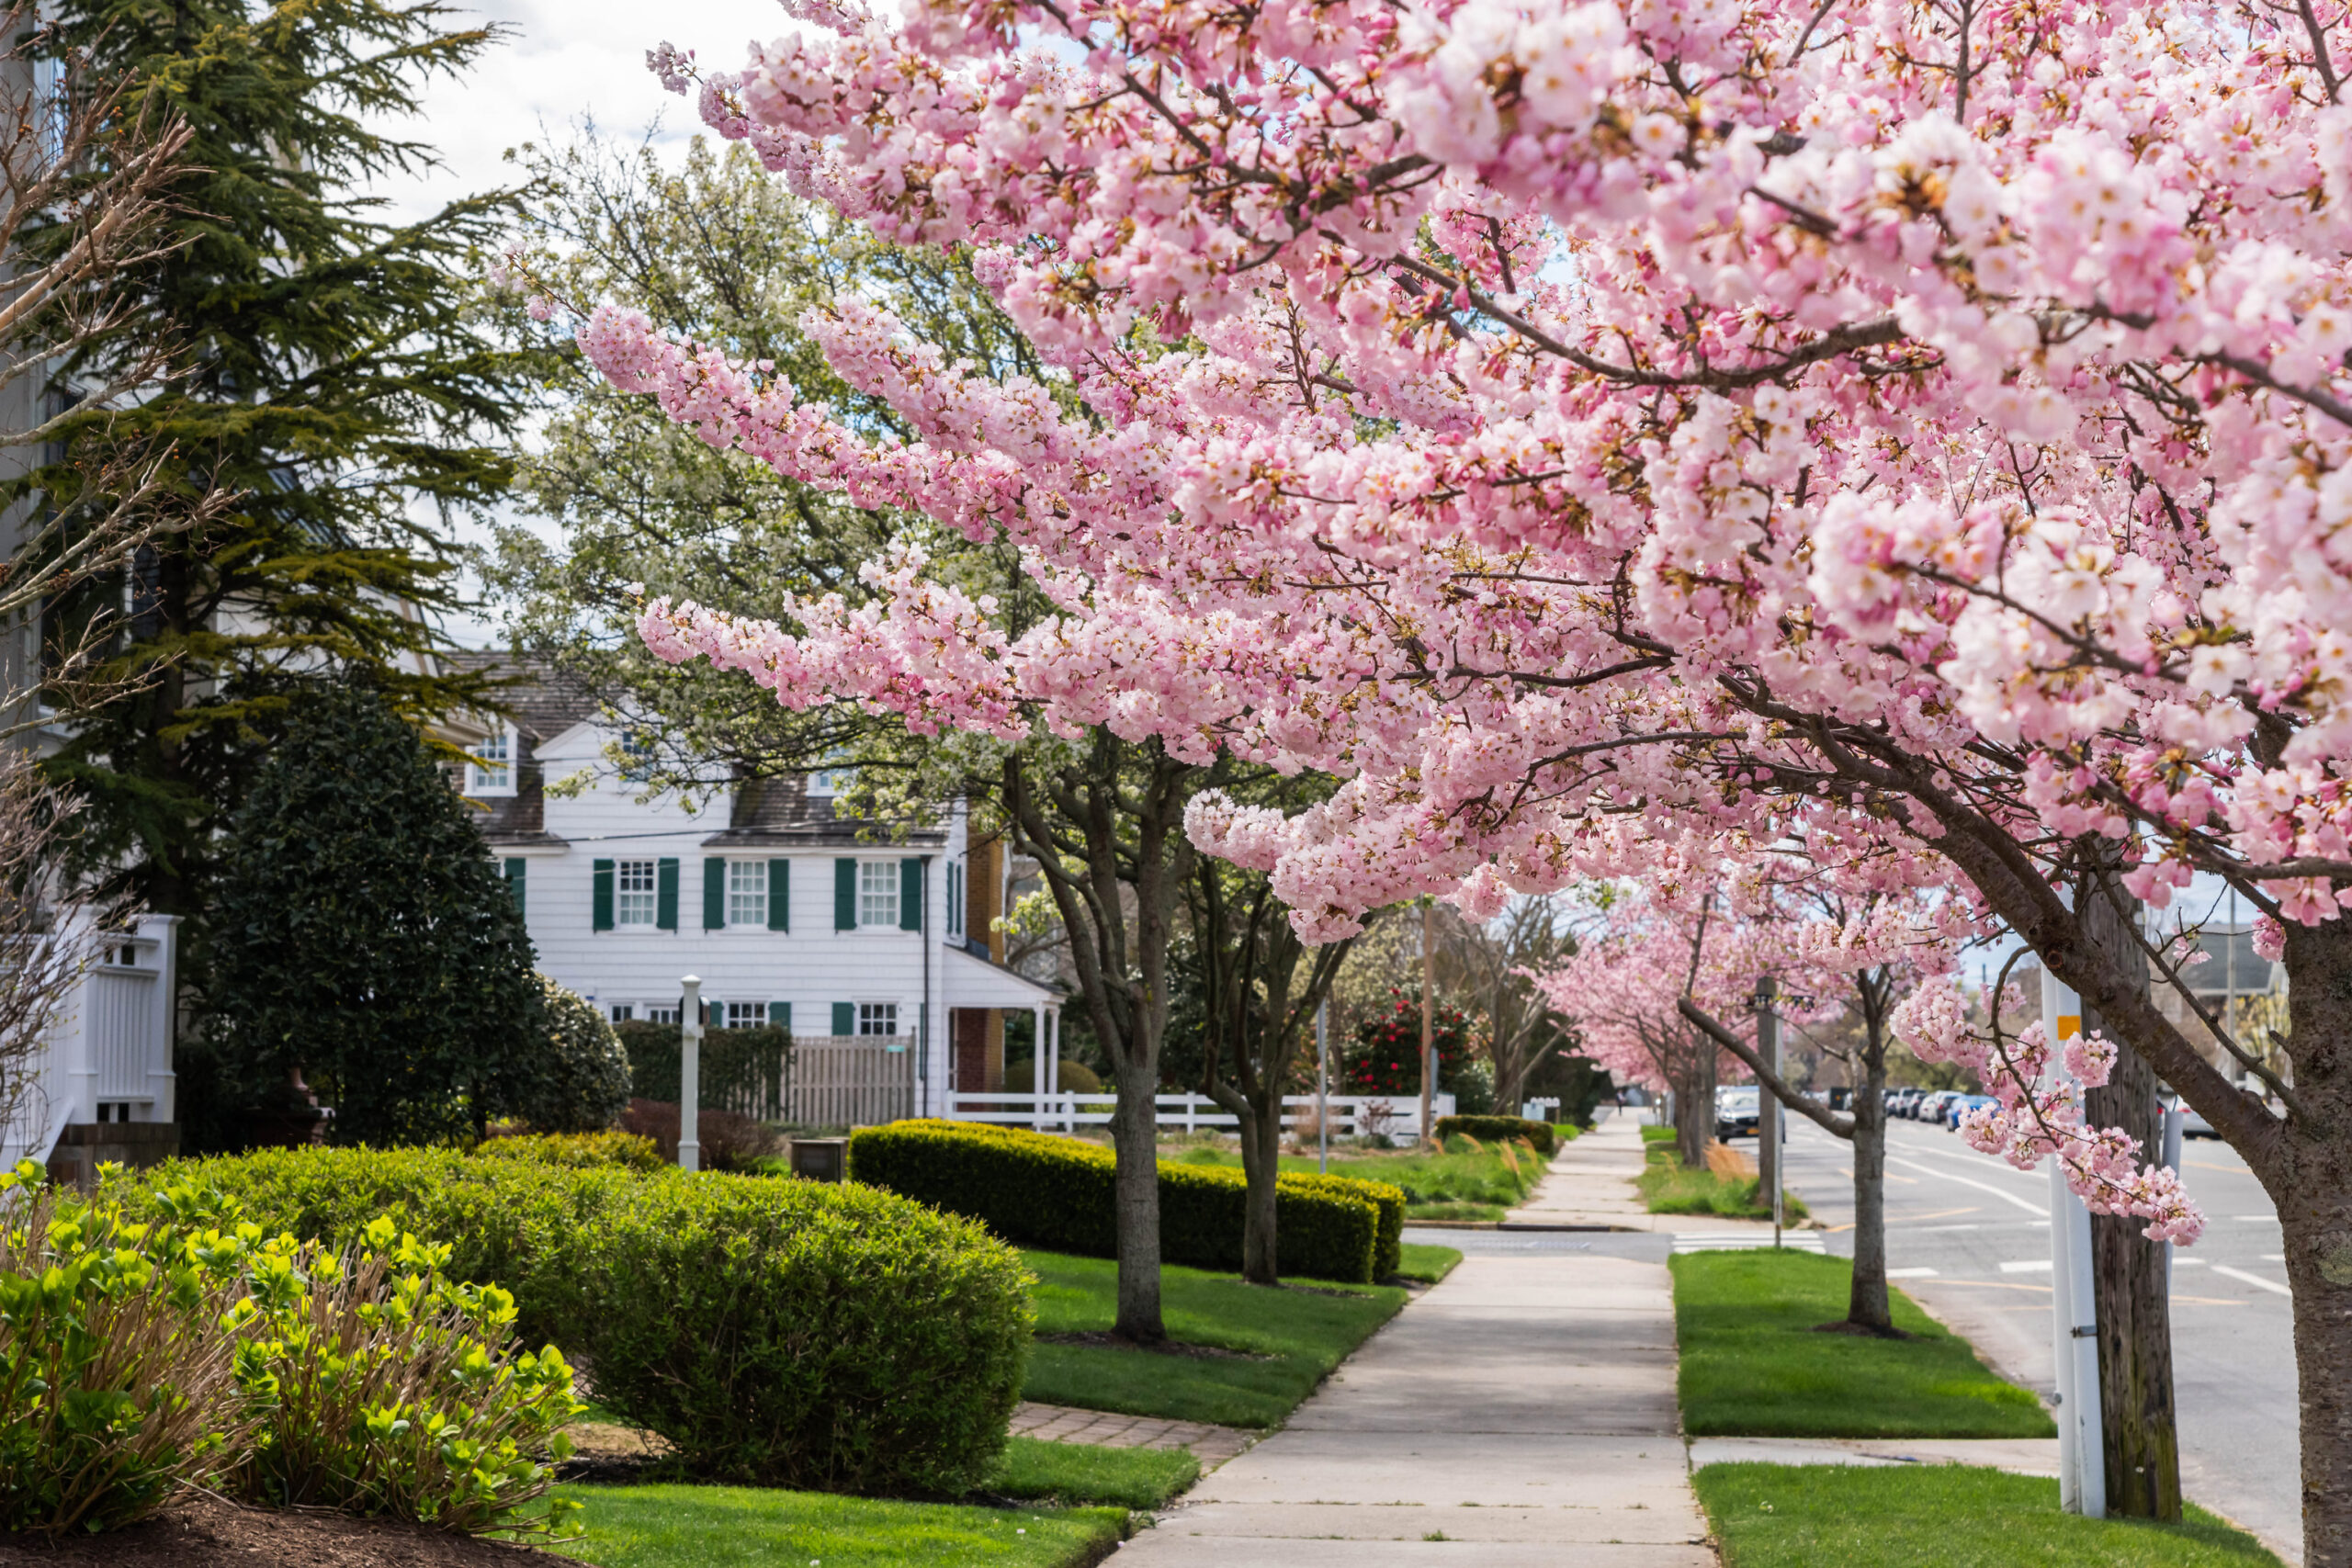 Pink cherry blossom trees along the sidewalk. The front lawns of homes are green and lush and there is a Victorian style house in the distance.